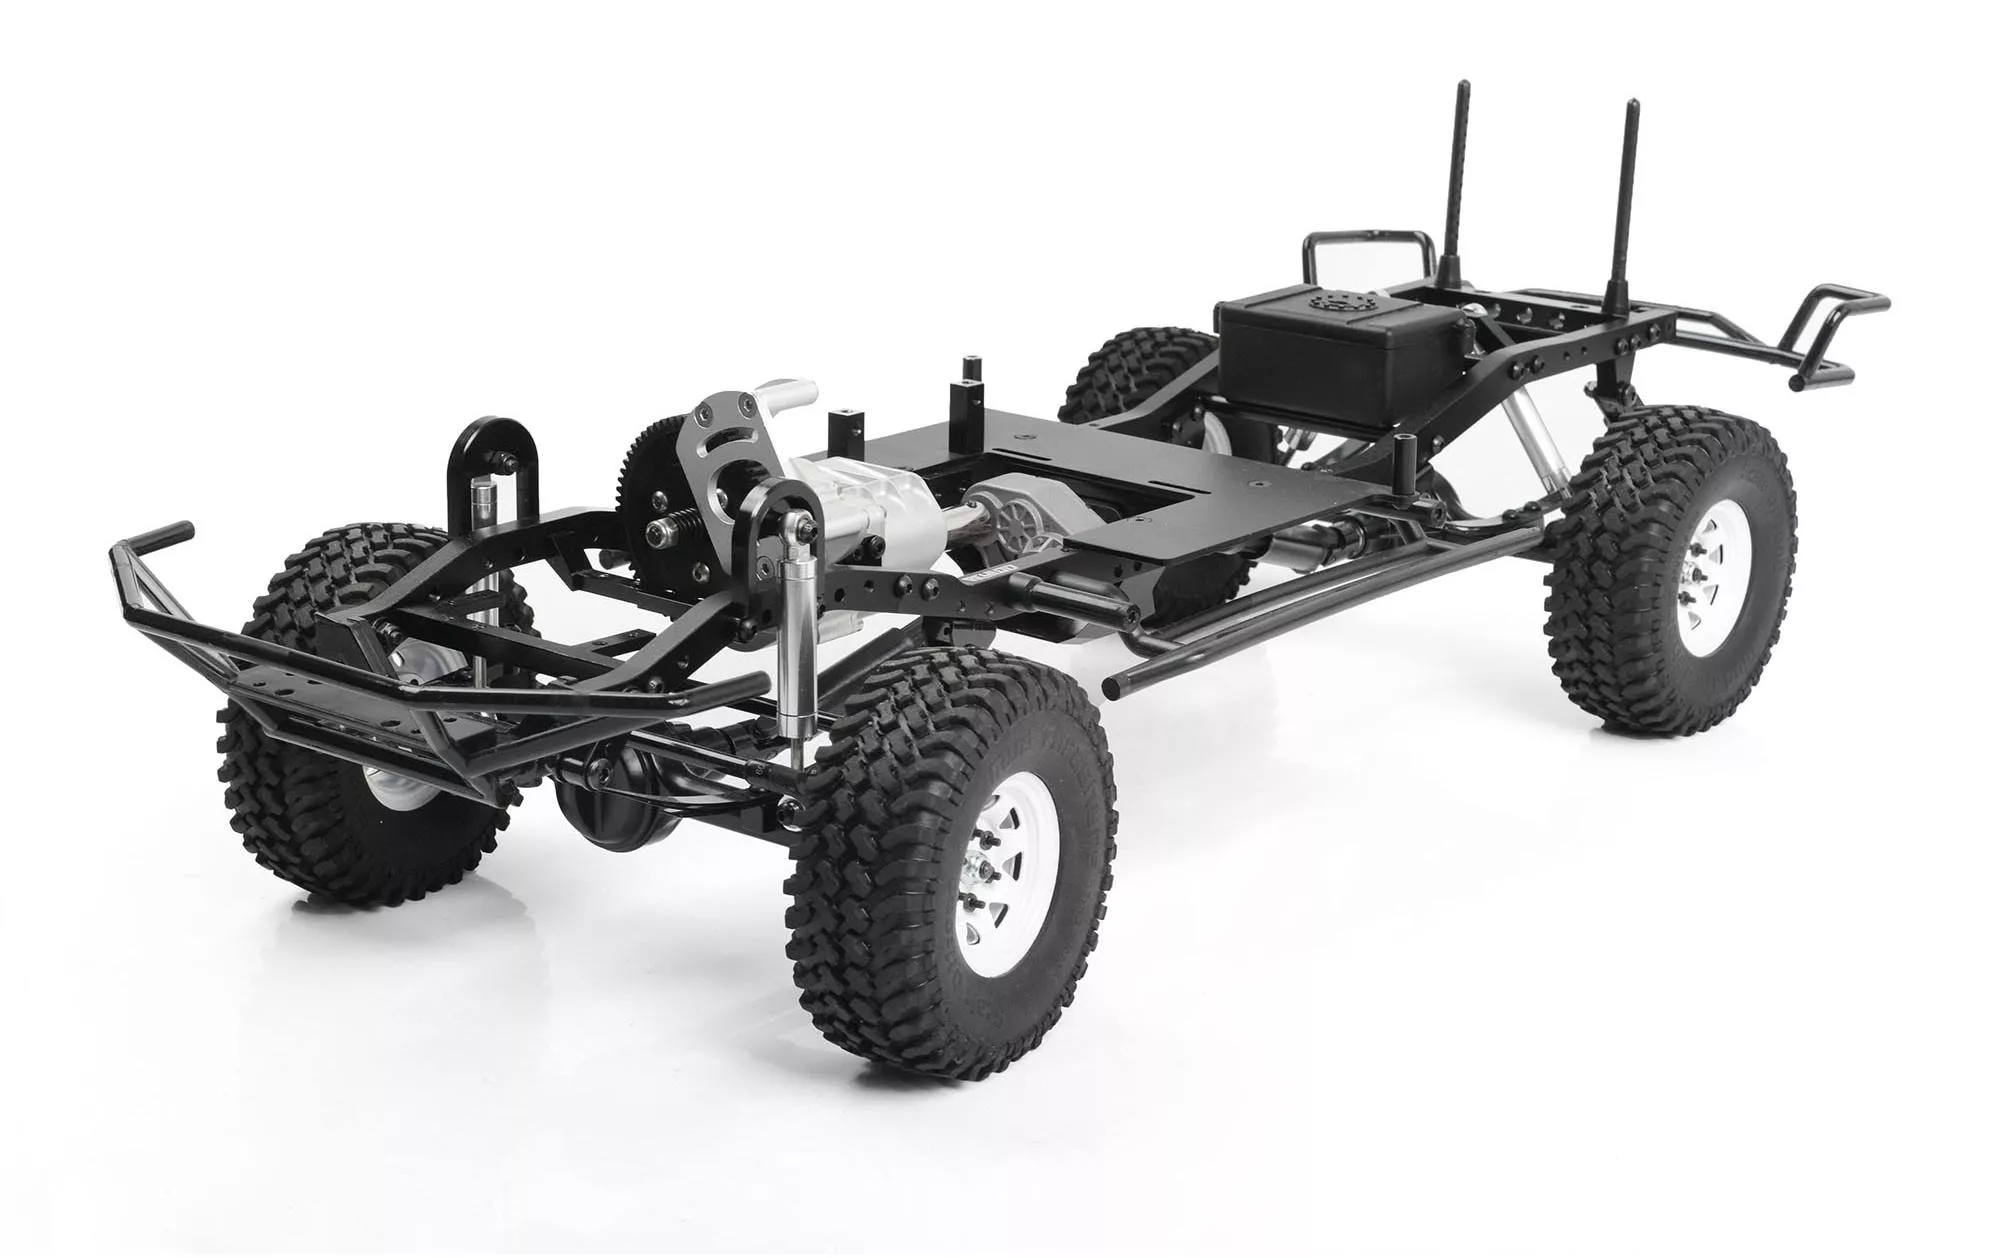 Scale Crawler Trail Finder 2 LWB Chassis Kit, 1:10